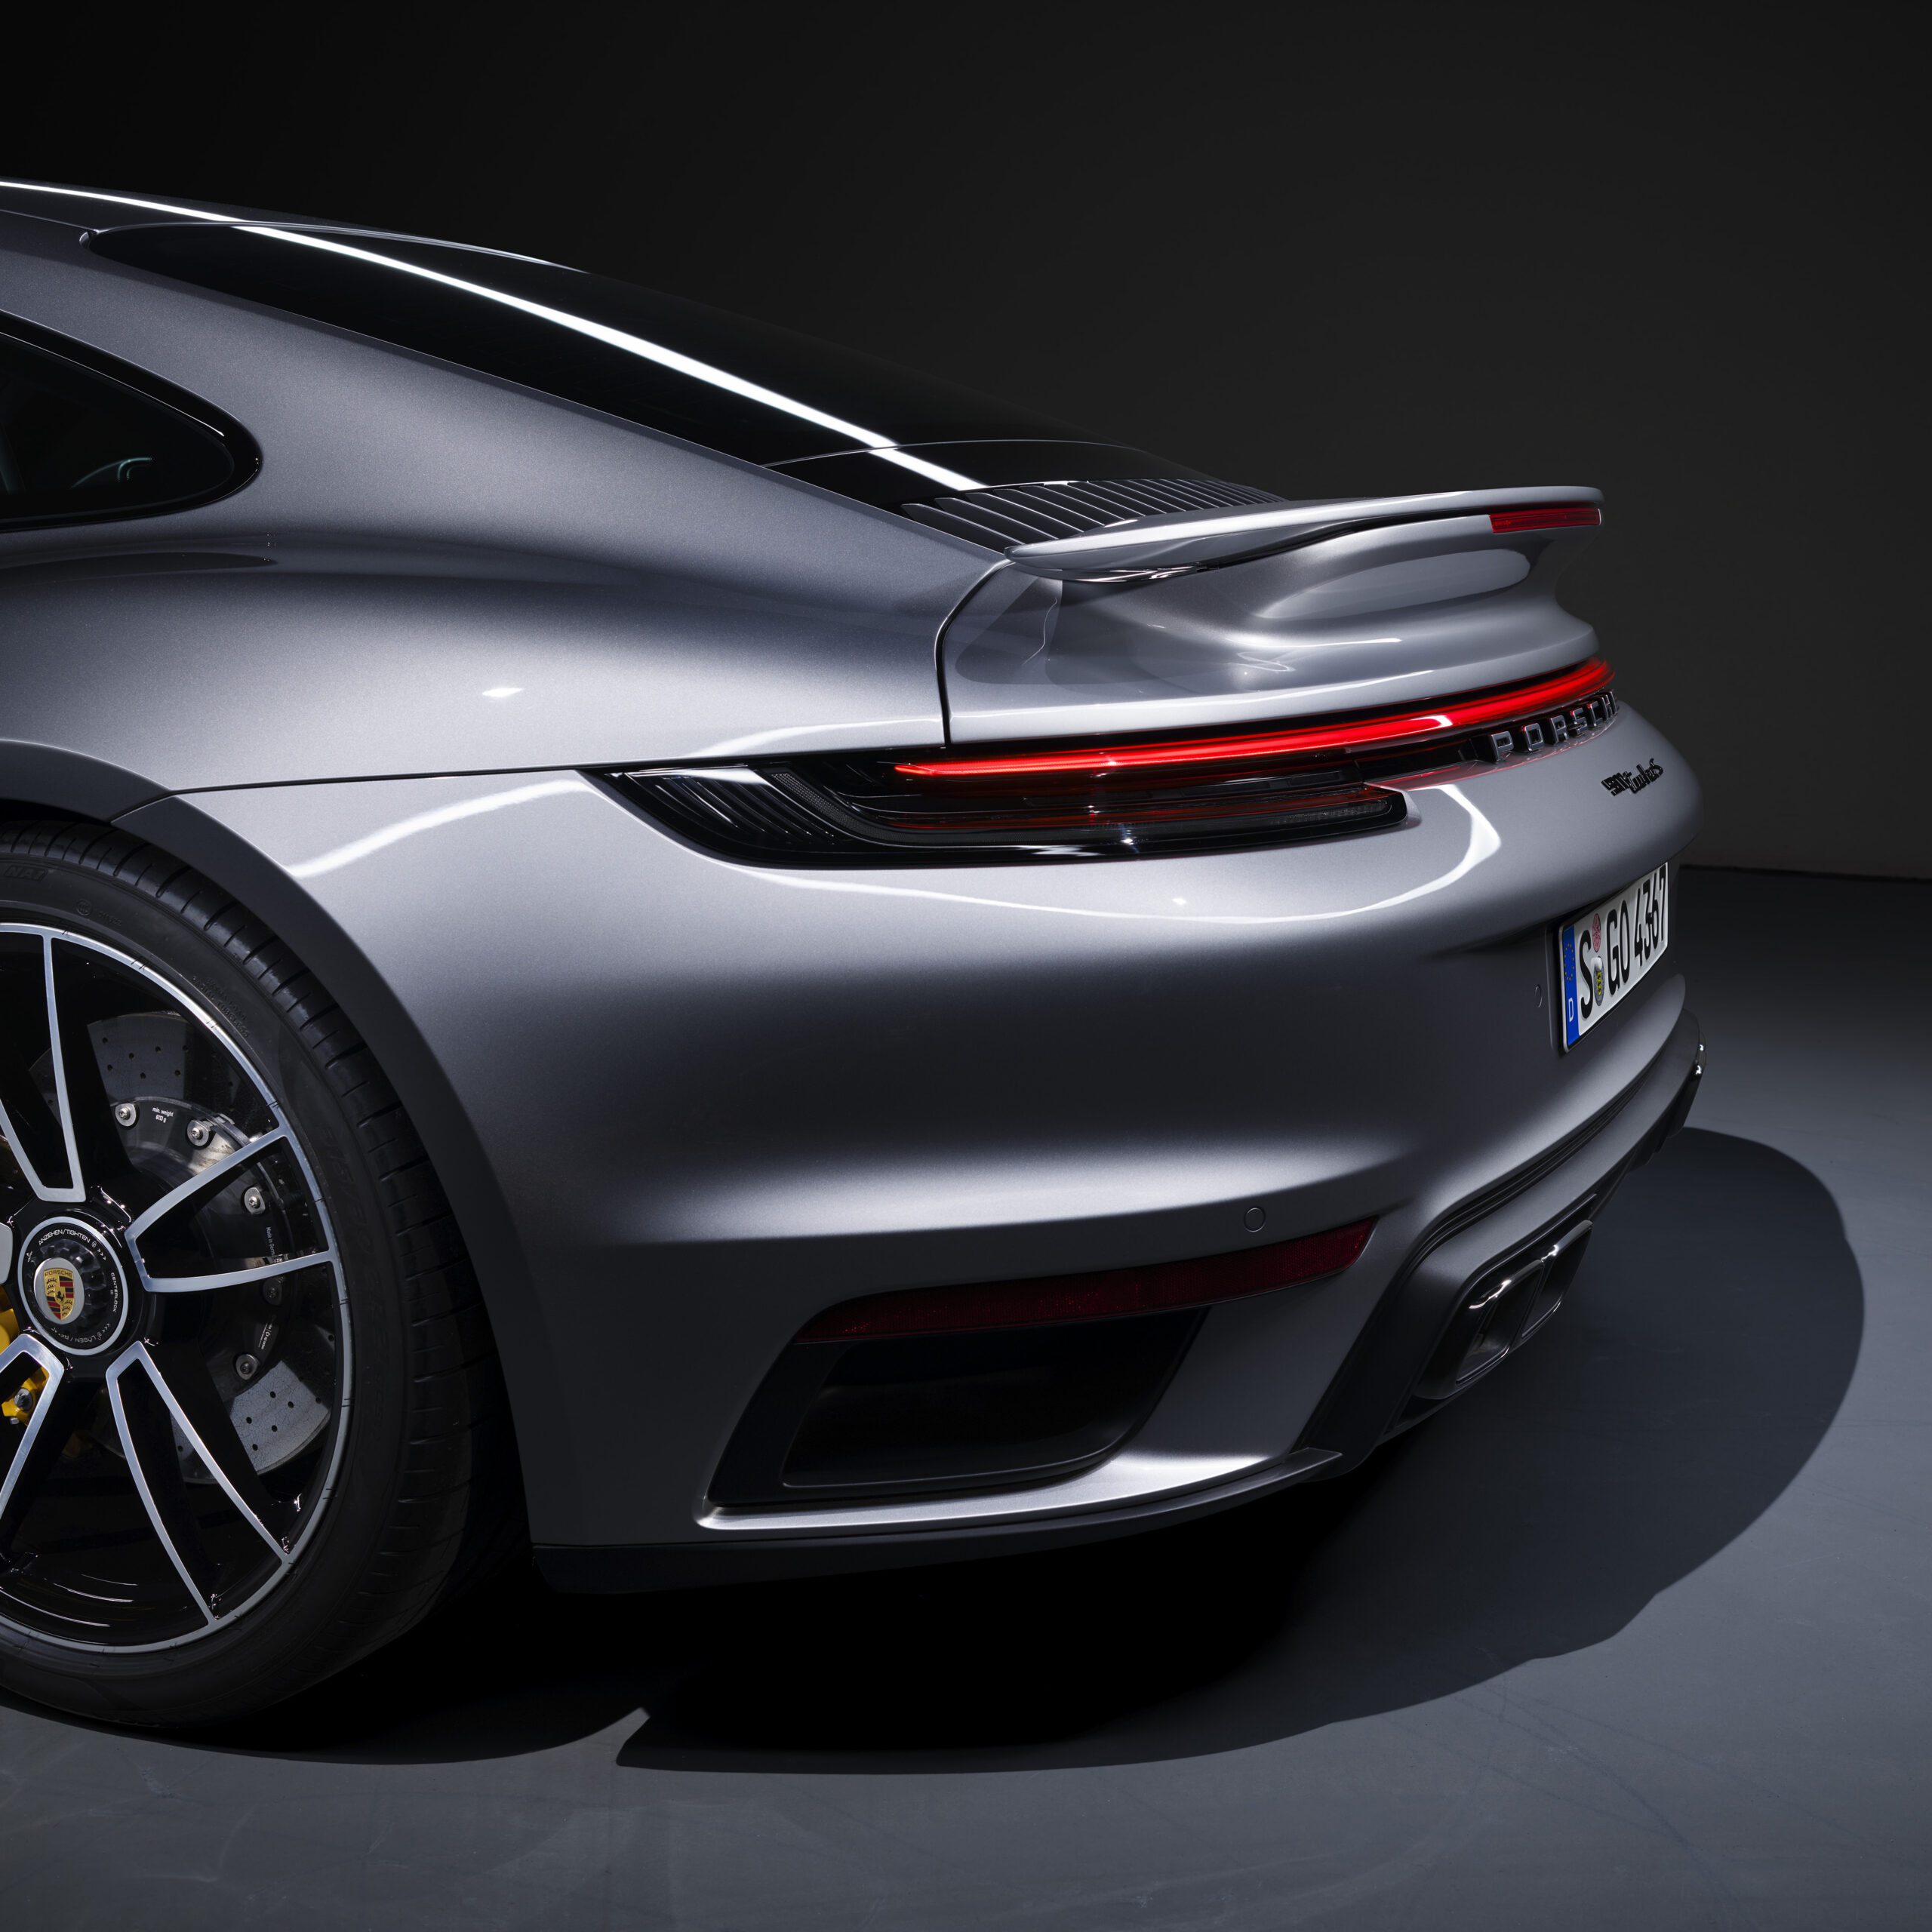 The Porsche 911 Turbo S is the latest in a long line of icons